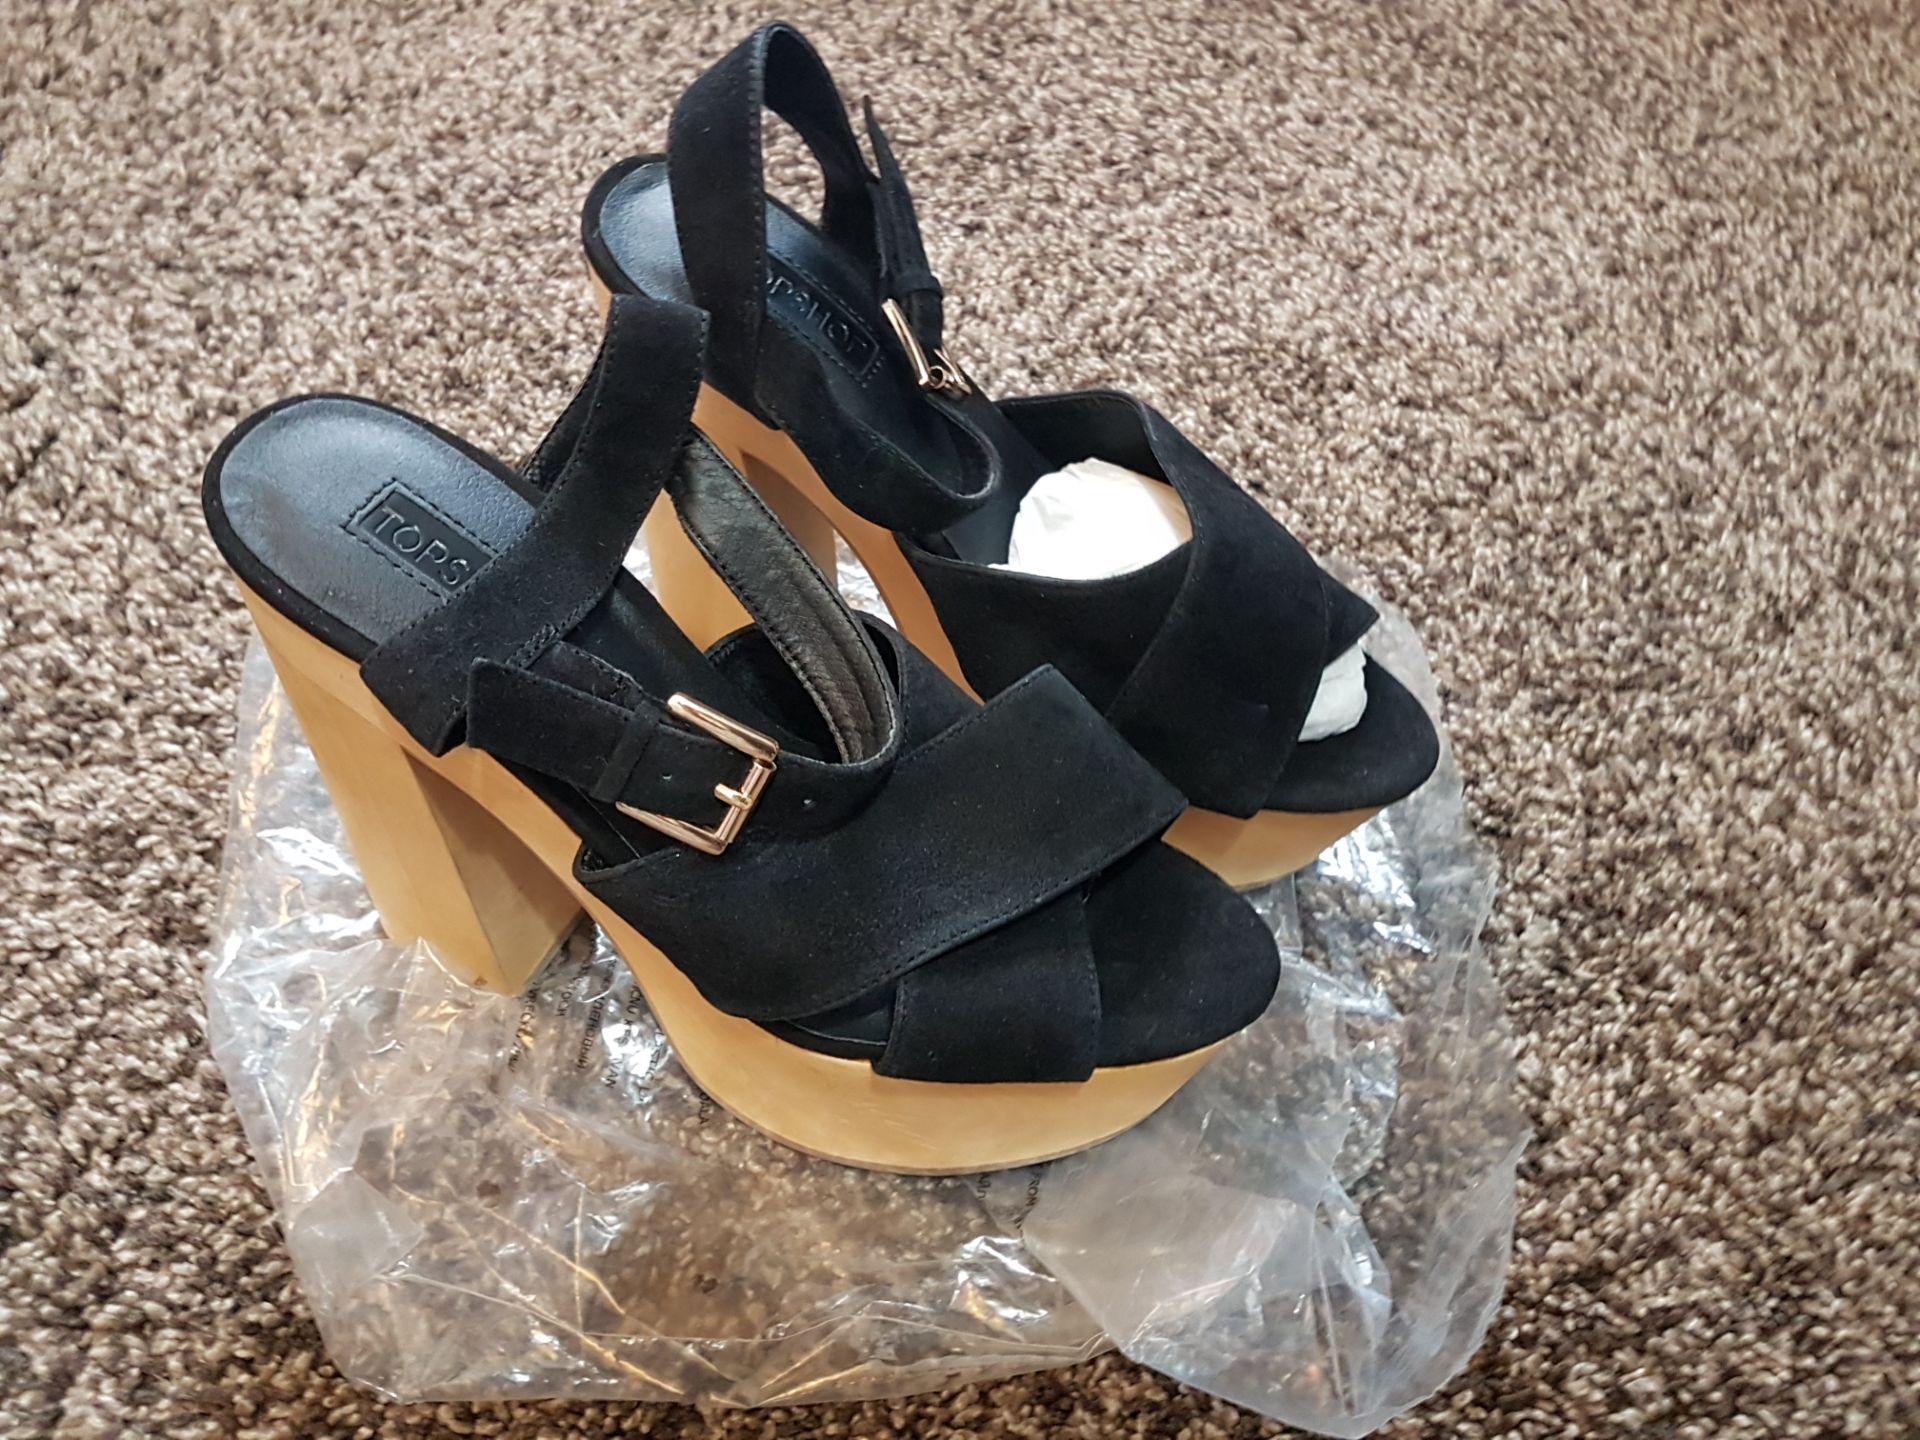 Brand New Unboxed Topshop Black High Wedge Shoes Size 5 RRP £55